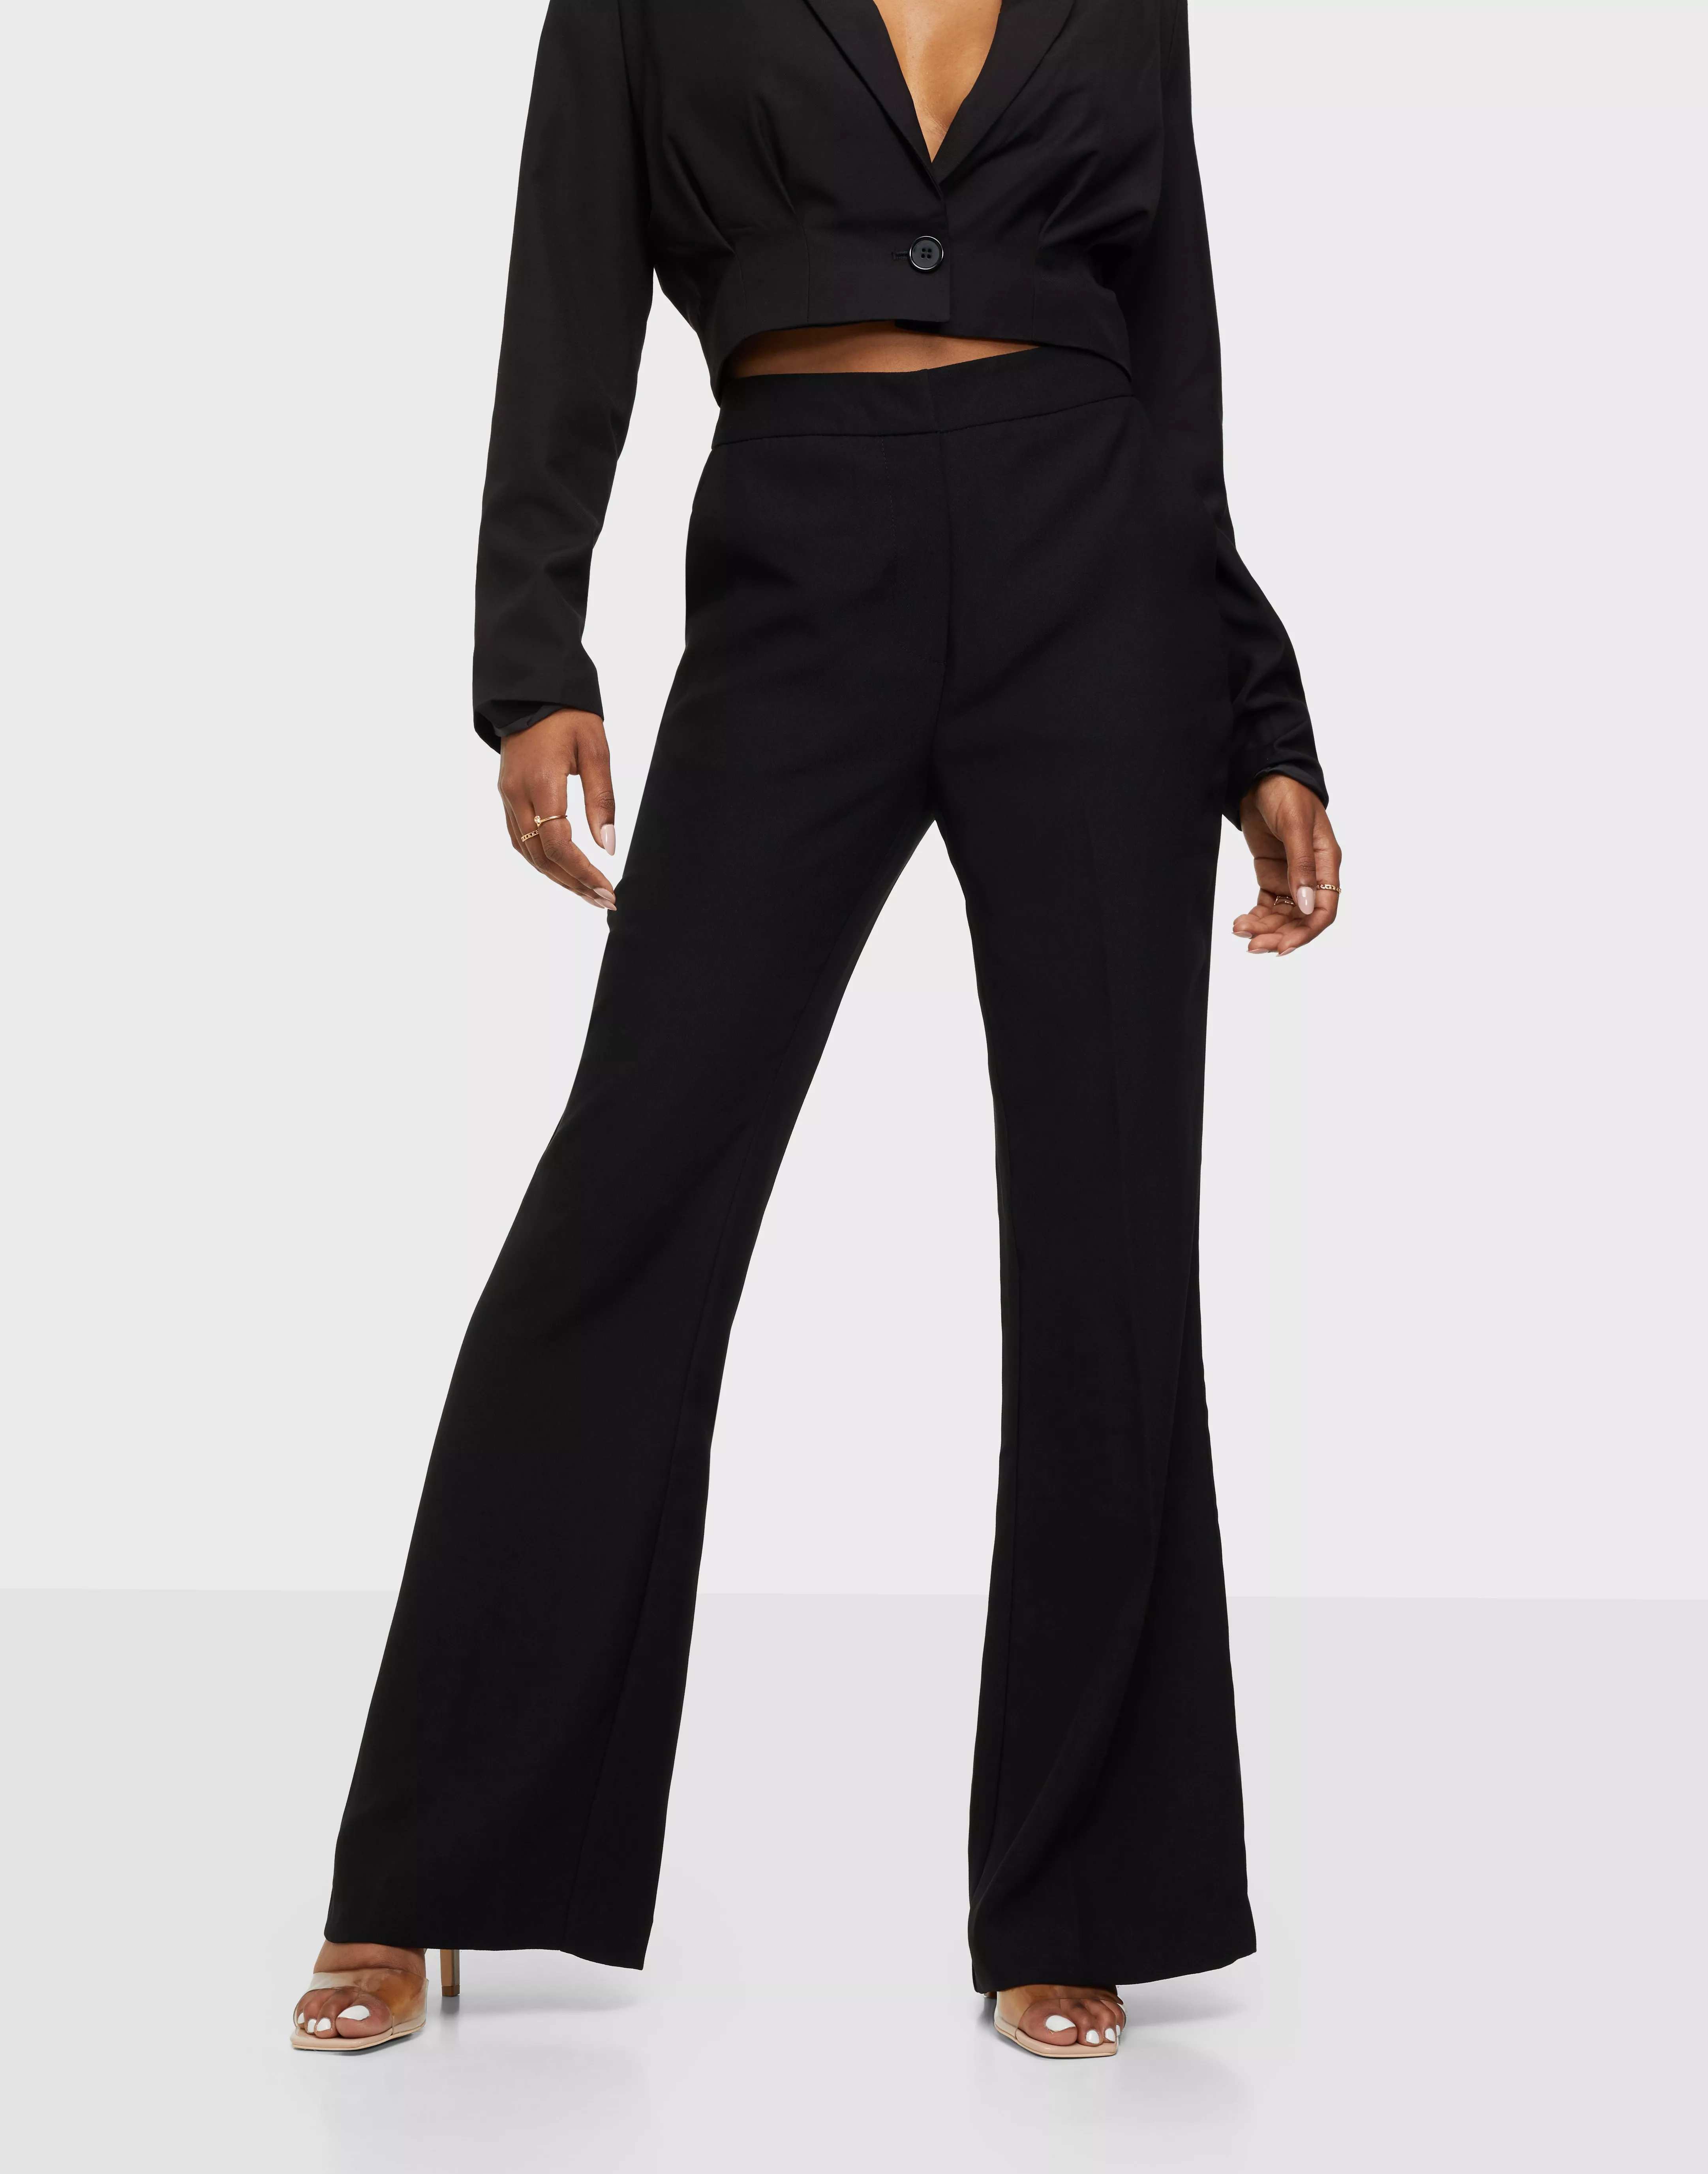 Shaped Suit - Sort | Nelly.com